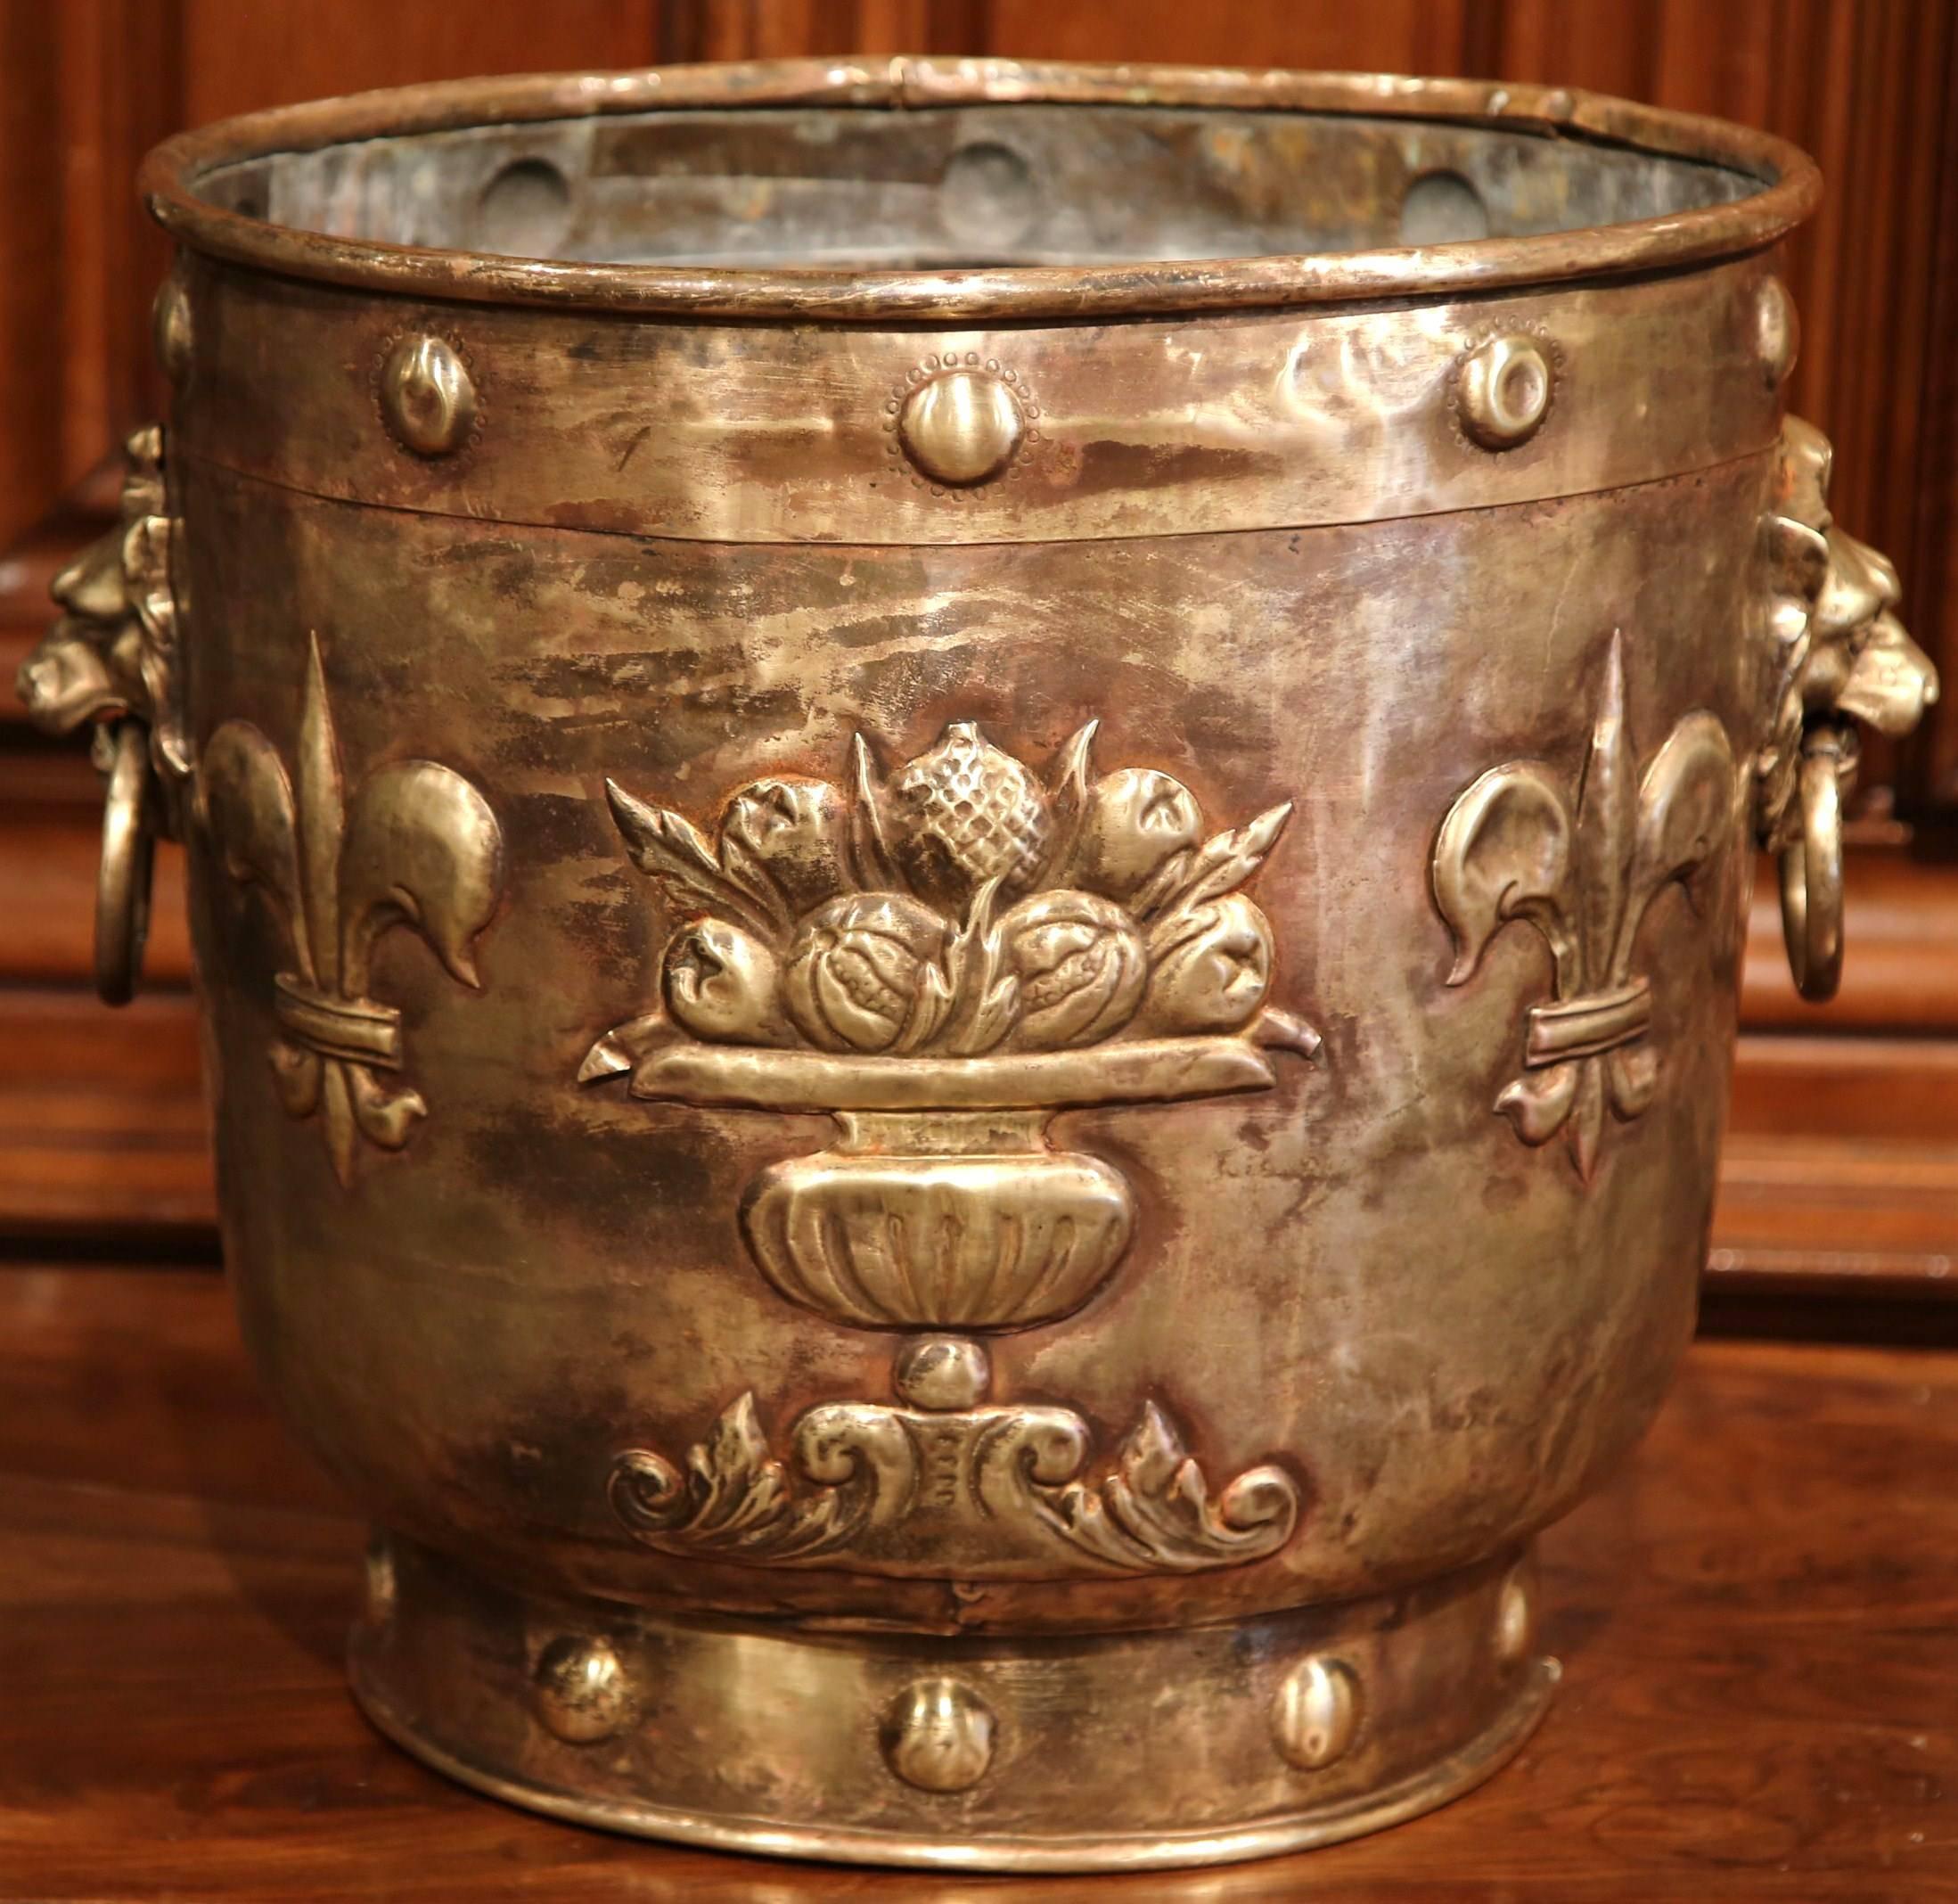 Hand-Crafted Large 19th Century French Brass Bucket with Repousse Motifs and Fleur-de-Lys